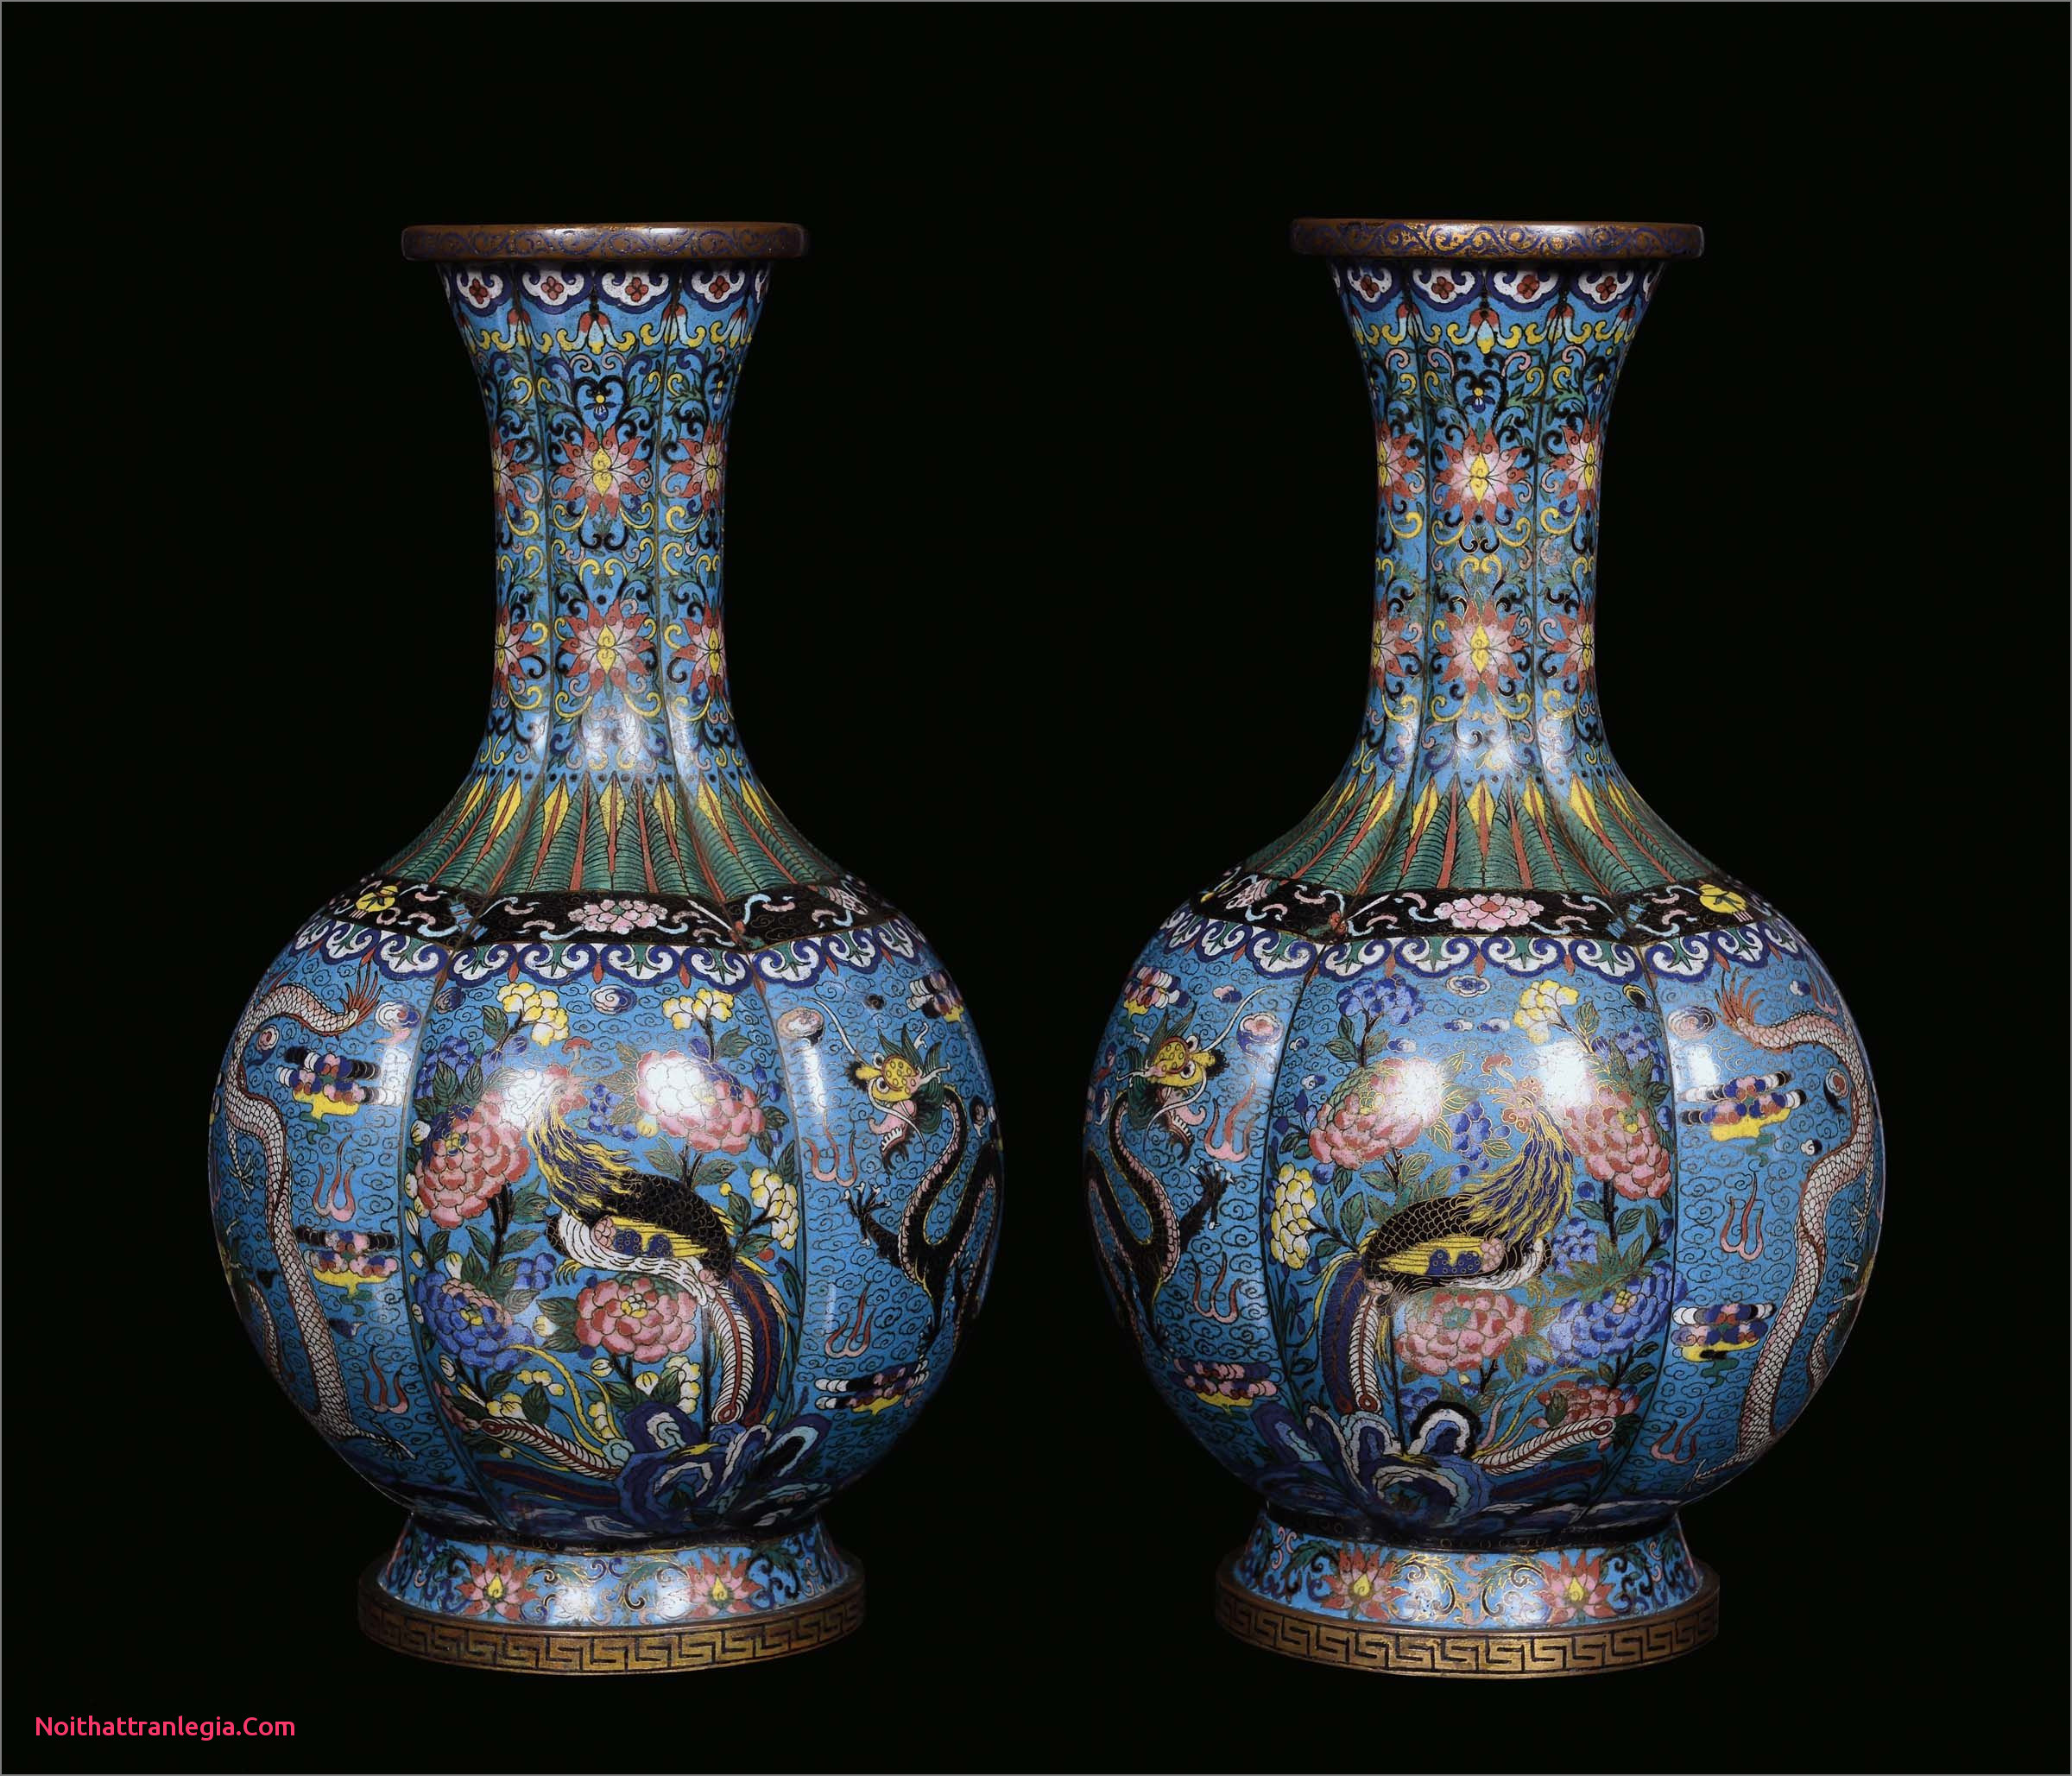 20 Fabulous Chinese Porcelain Vases for Sale 2022 free download chinese porcelain vases for sale of 20 chinese antique vase noithattranlegia vases design with regard to a pair of cloisonna vases with naturalistic decoration china qing dynasty guangxu per